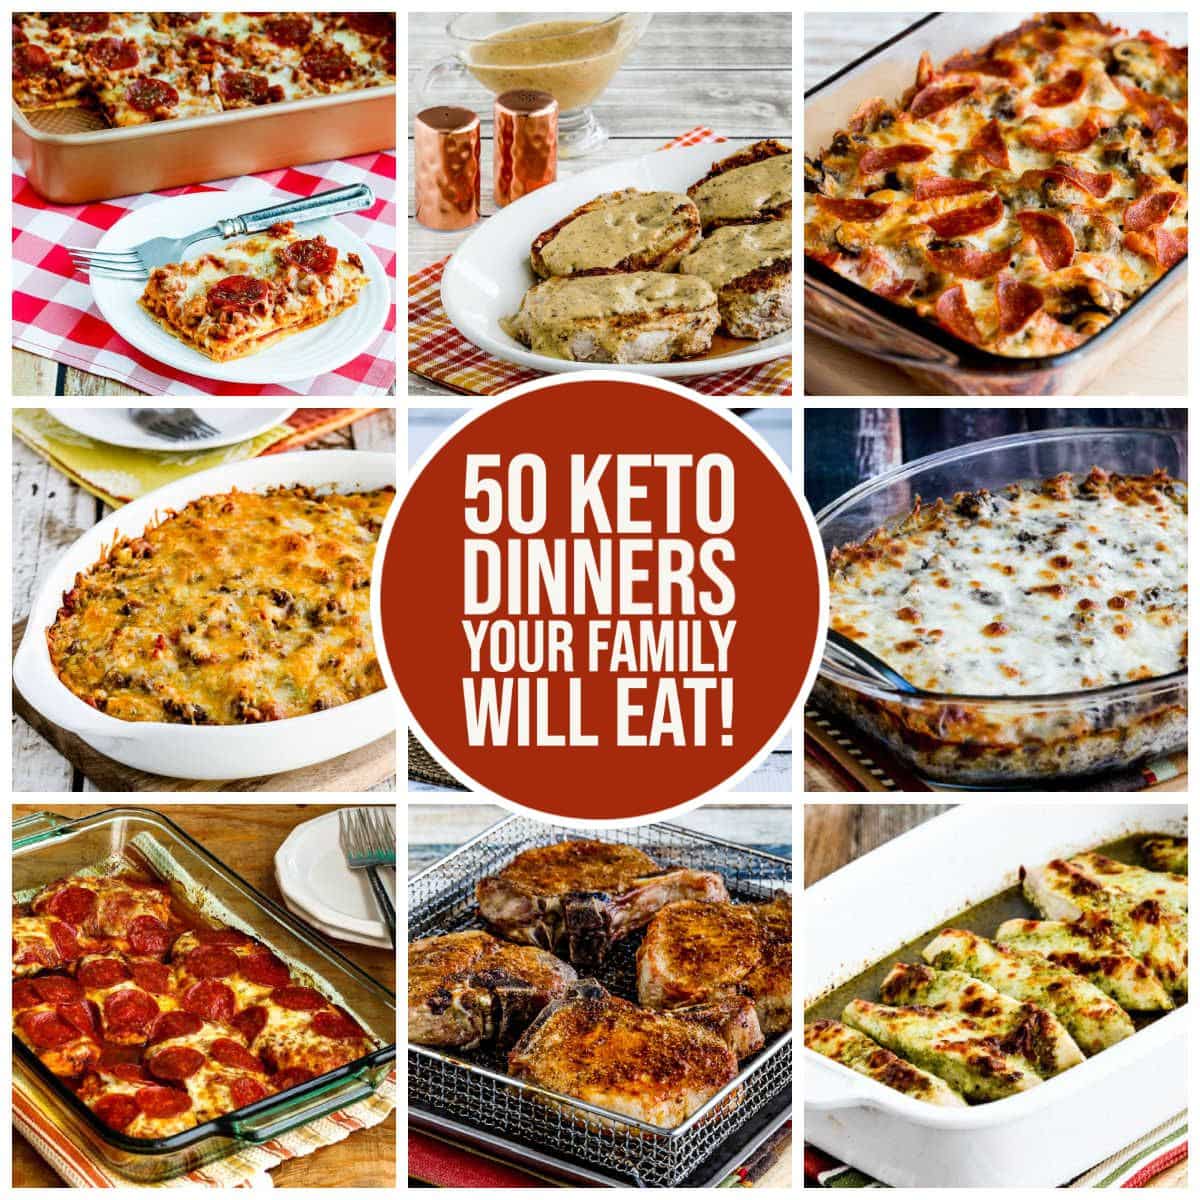 50 Keto Dinners Your Family Will Eat Collage Overlay Text of Featured Recipes